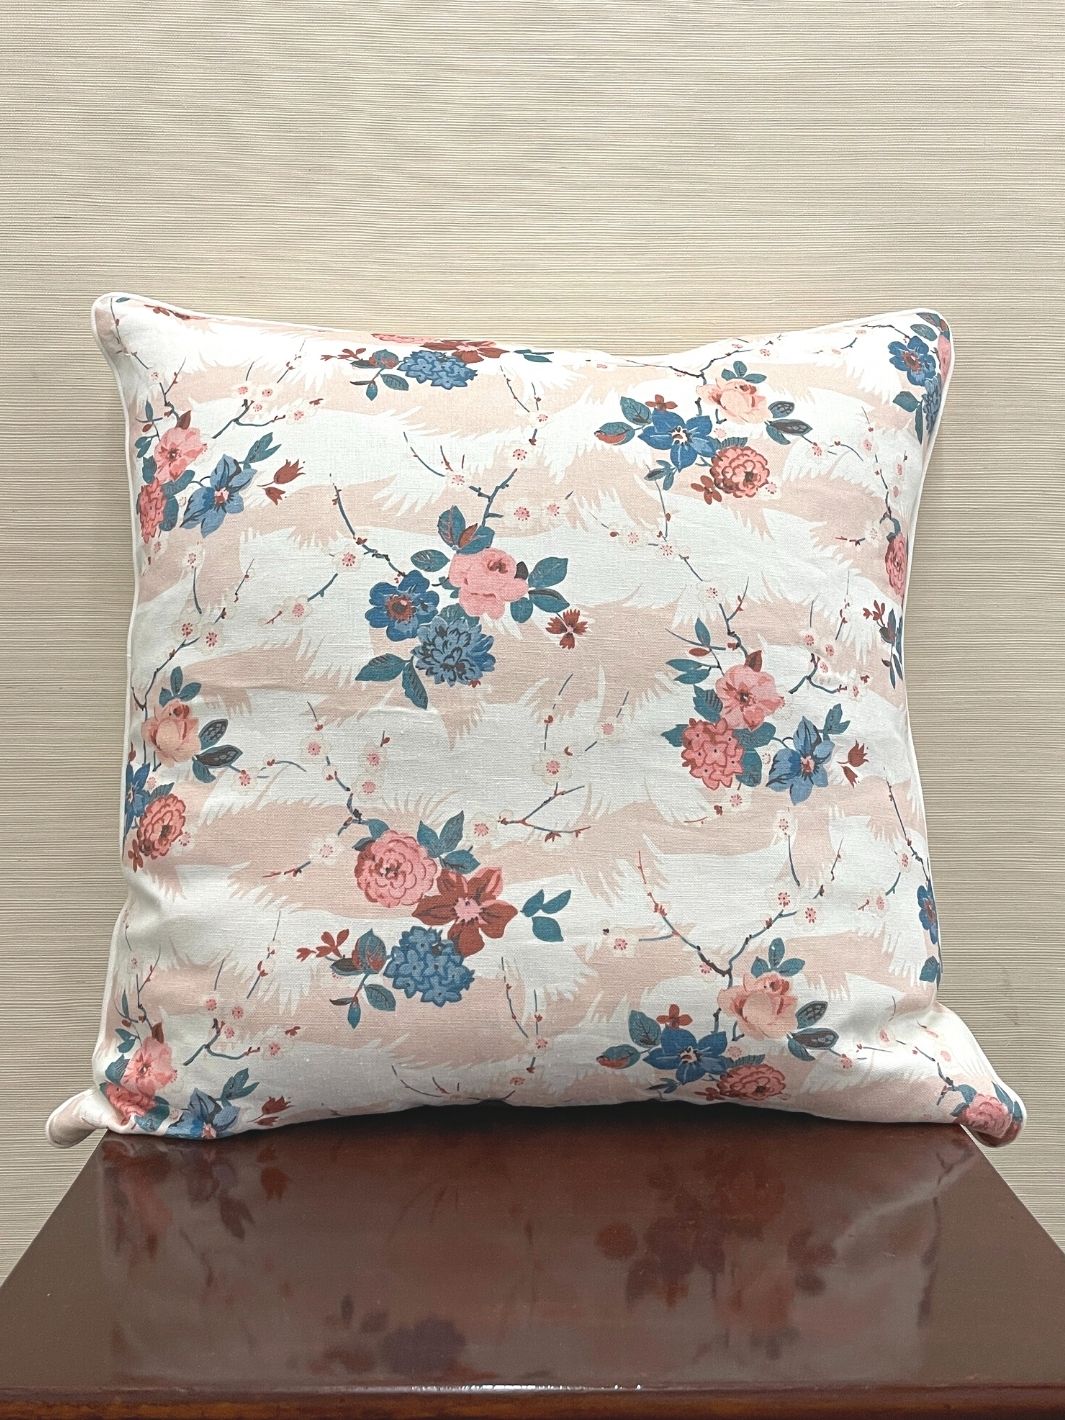 'Dora Chintz' Throw Pillow by Nathan Turner 24x24 - Pink + Blue on Linen